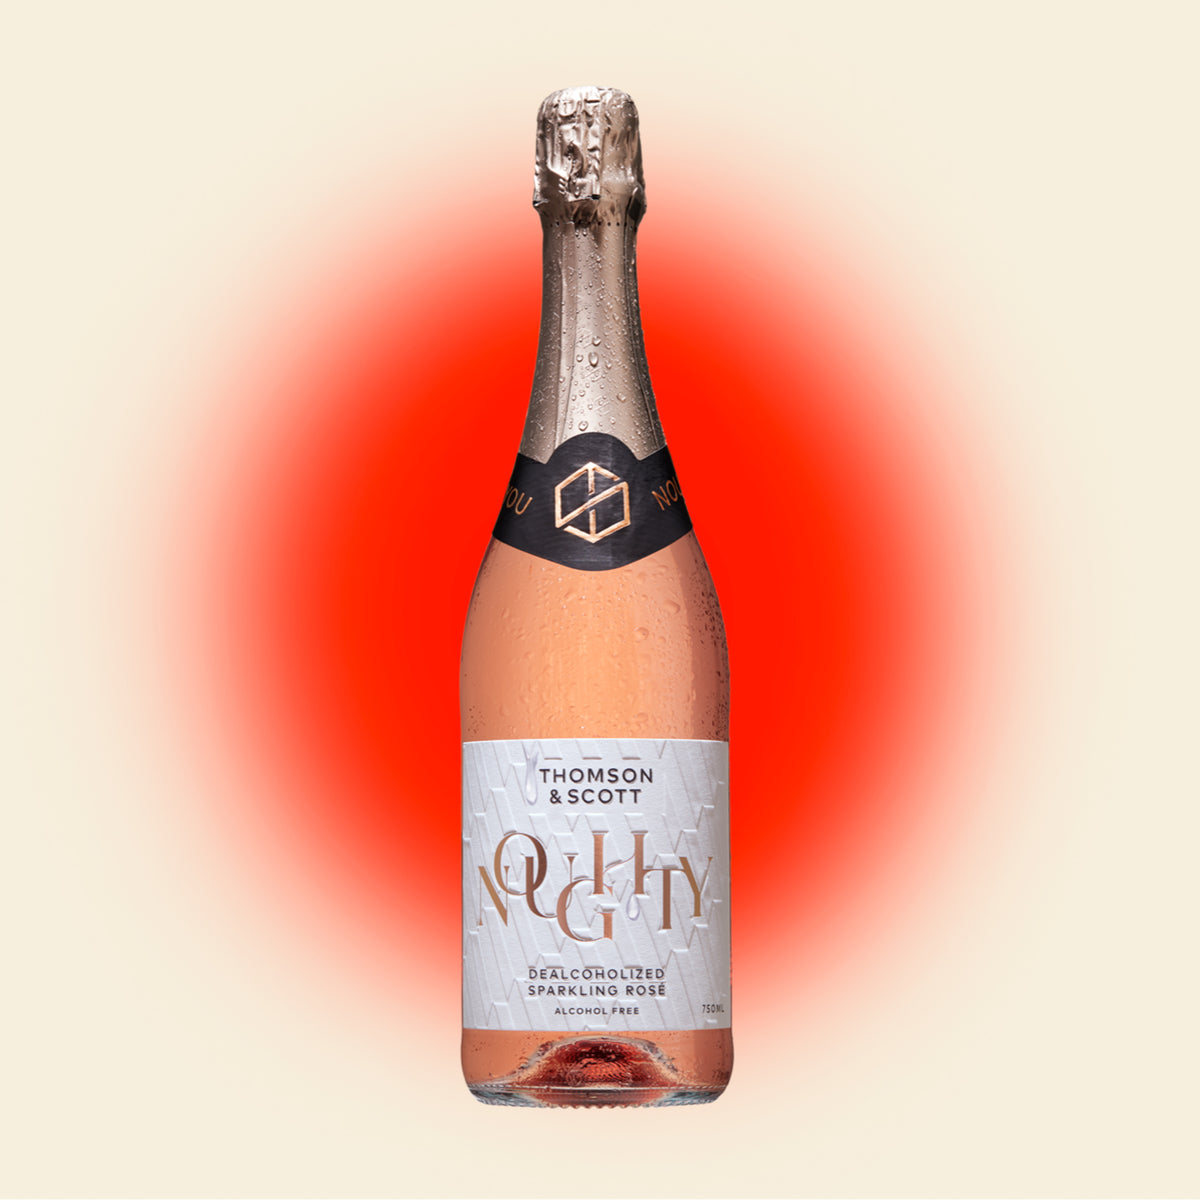 Noughty Sparkling Rose Nonalcoholic Wine